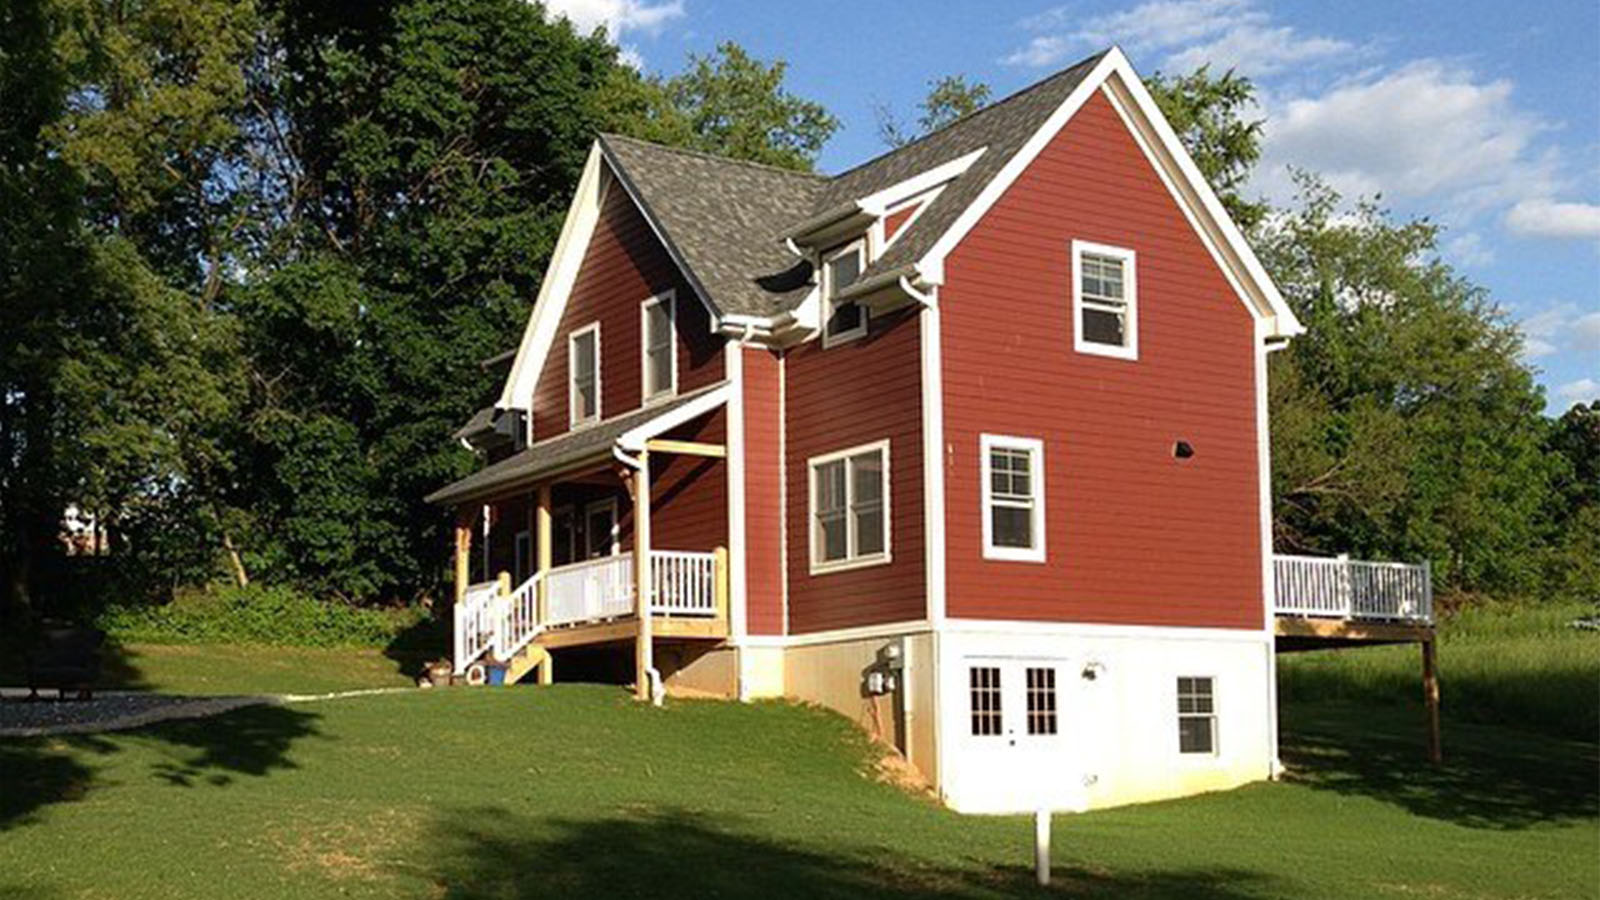 Stewartstown PA (T00806) exterior view of red timber frame home